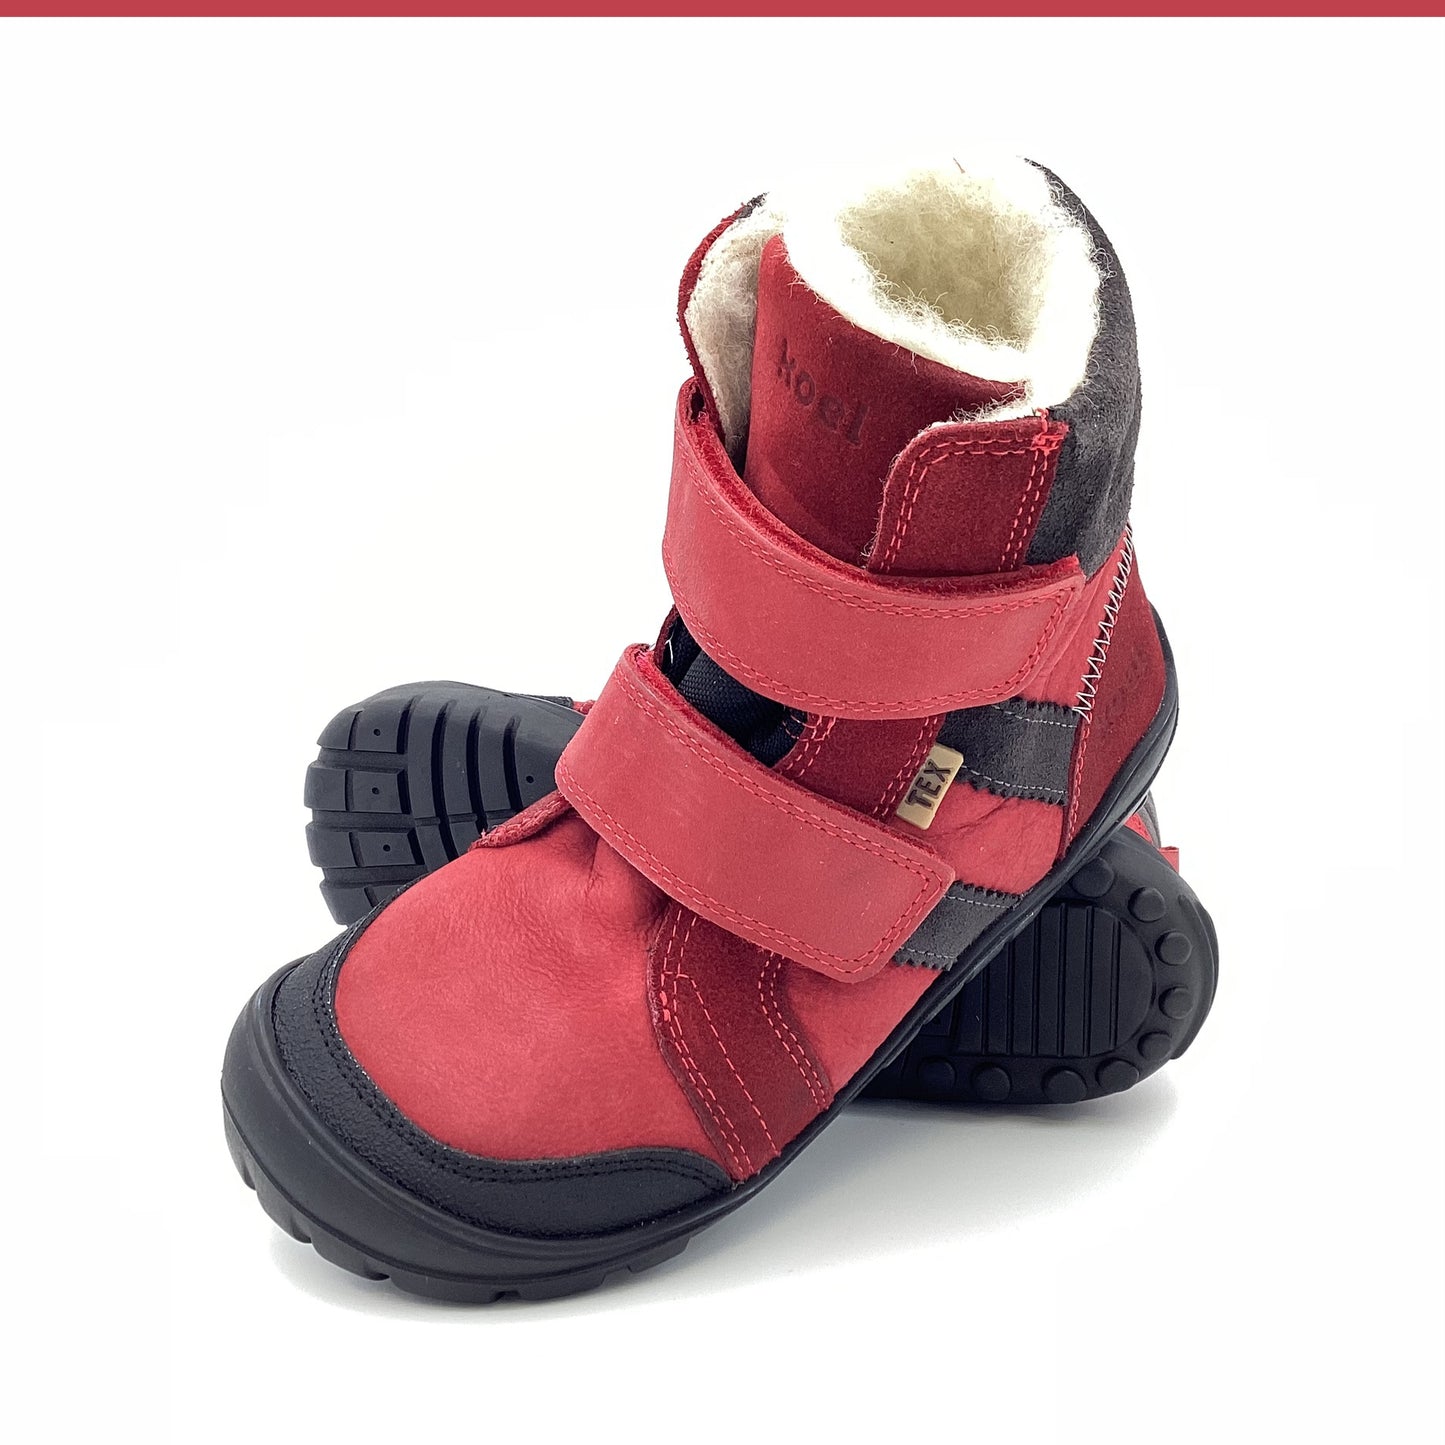 WINTER BOOT BAREFOOT HYDRO TEX MILO I WOLLE